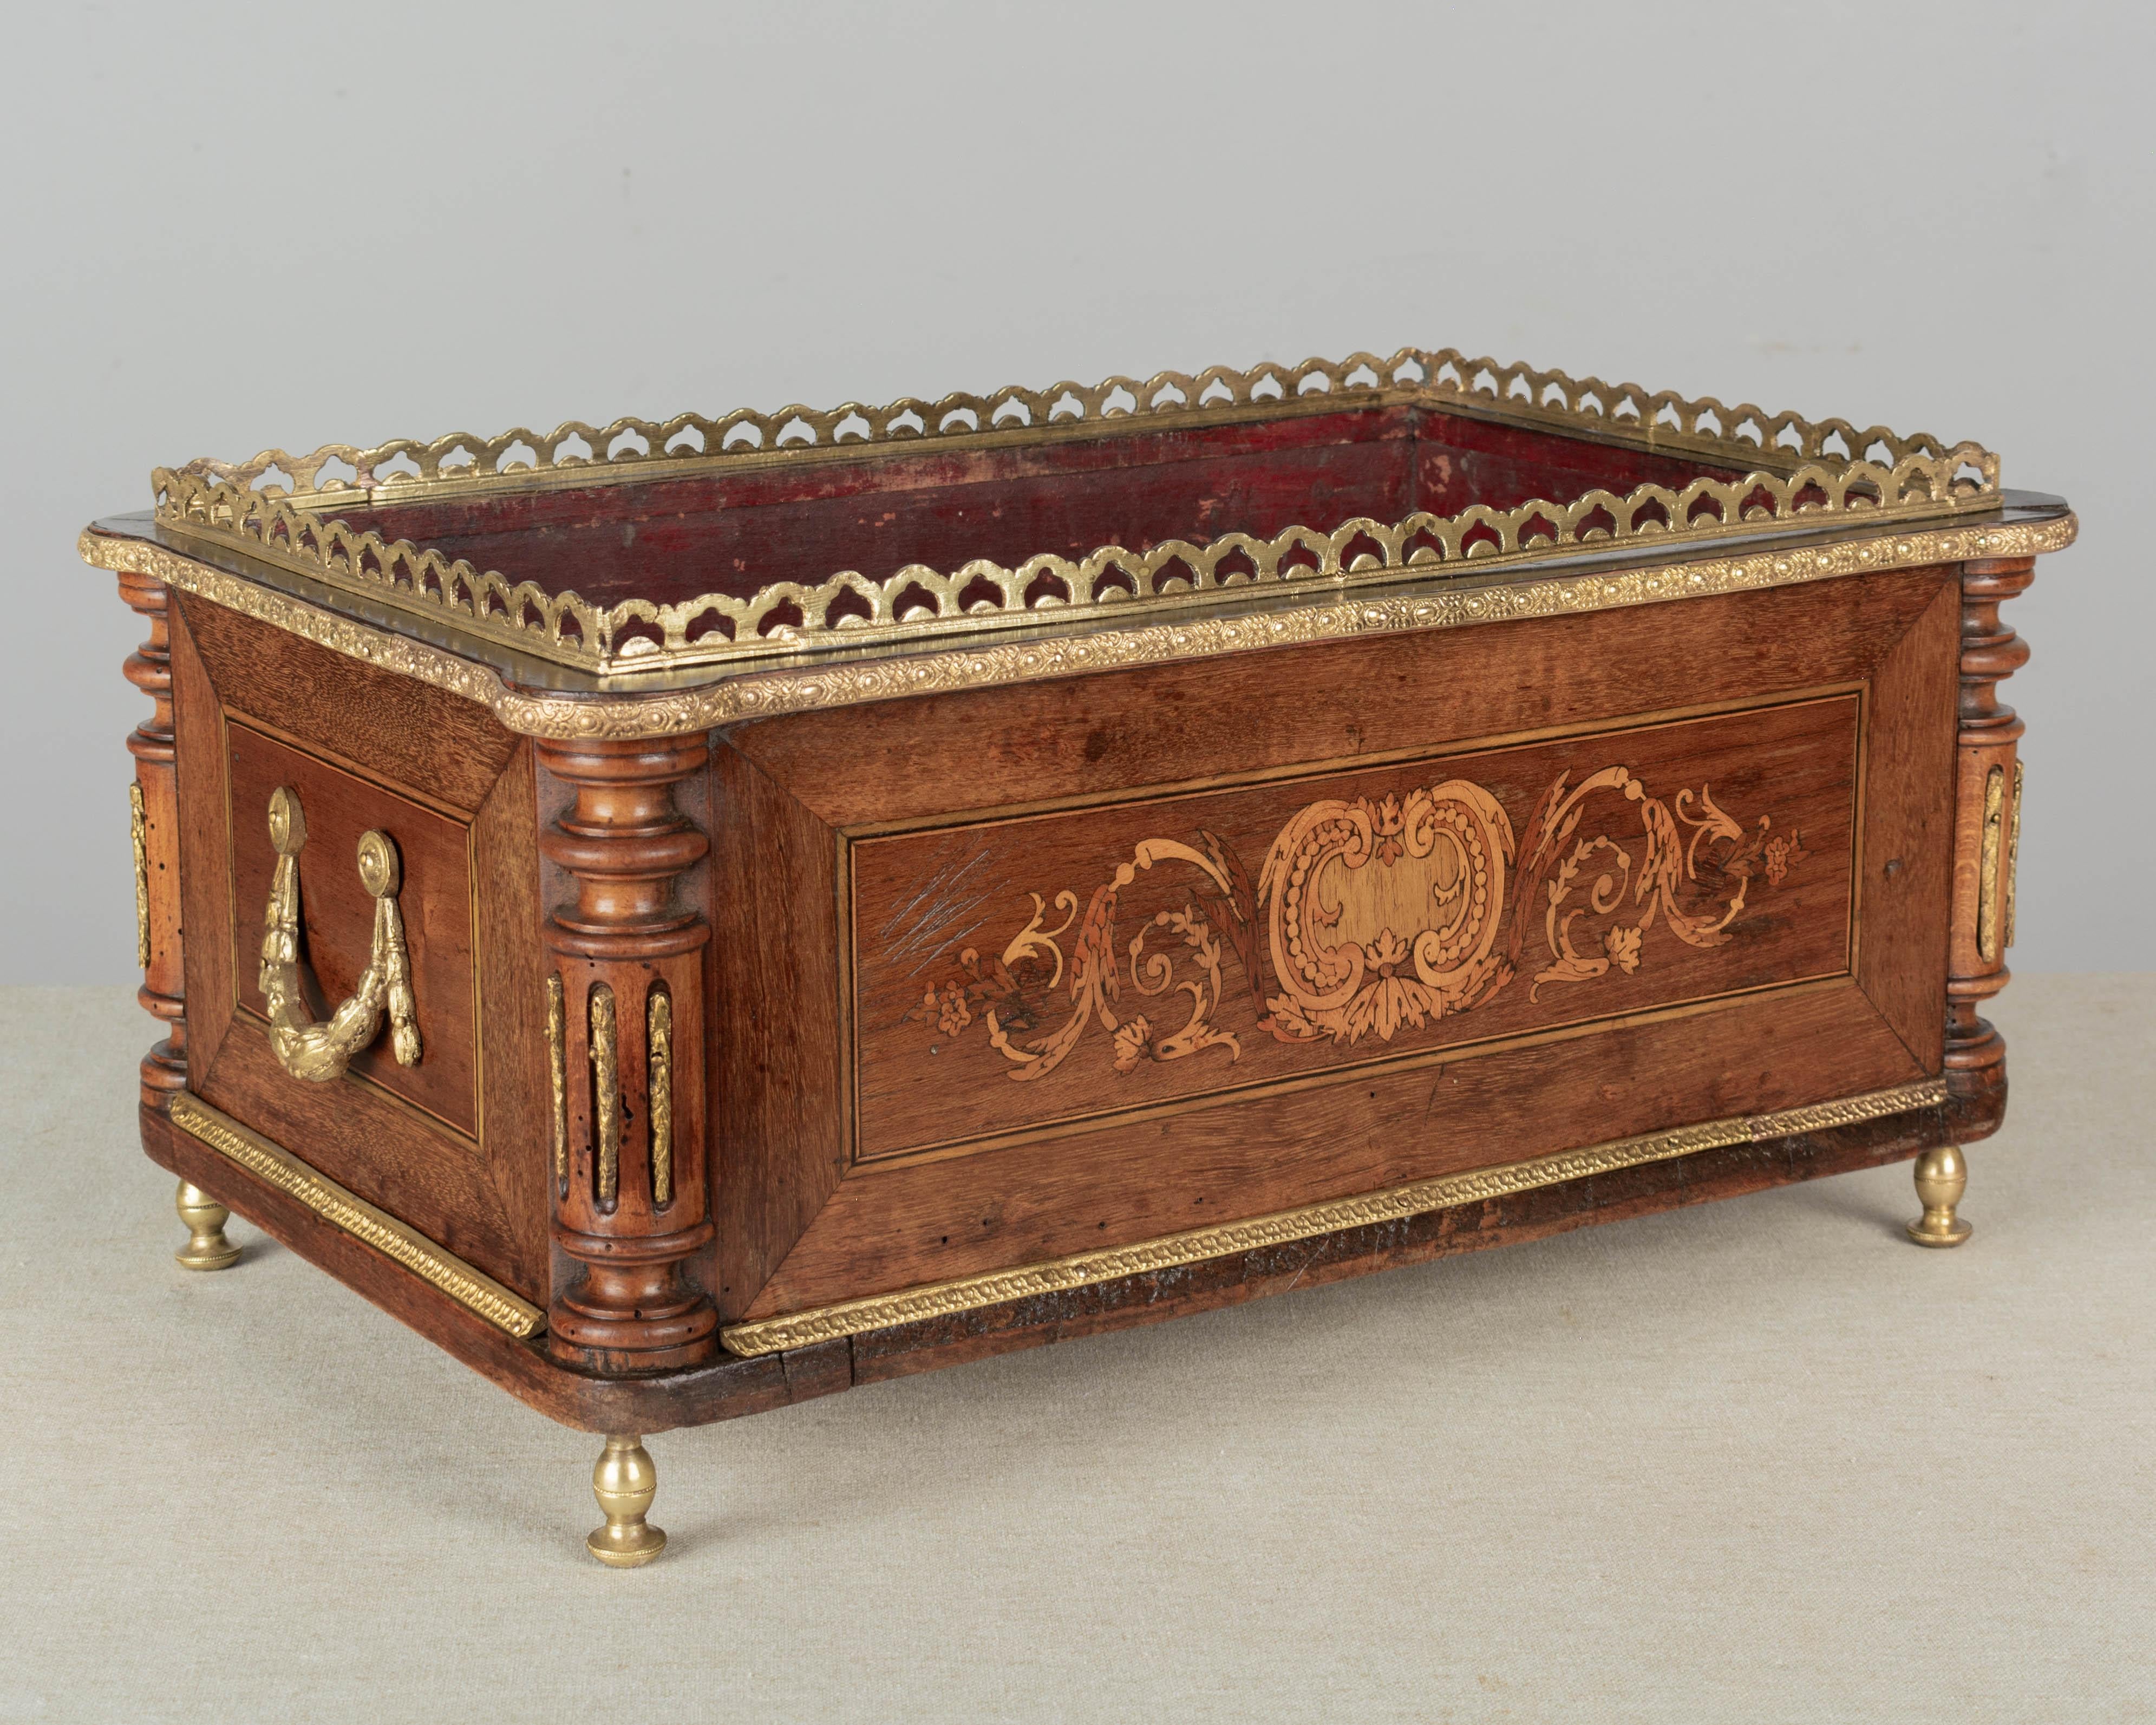 An early 20th century French Napoleon III marquetry jardinière with inlaid veneers of walnut and mahogany and turned corner details. Bronze-mounted with two handles, gallery and trim. Missing the zinc liner. A beautiful planter for the display of